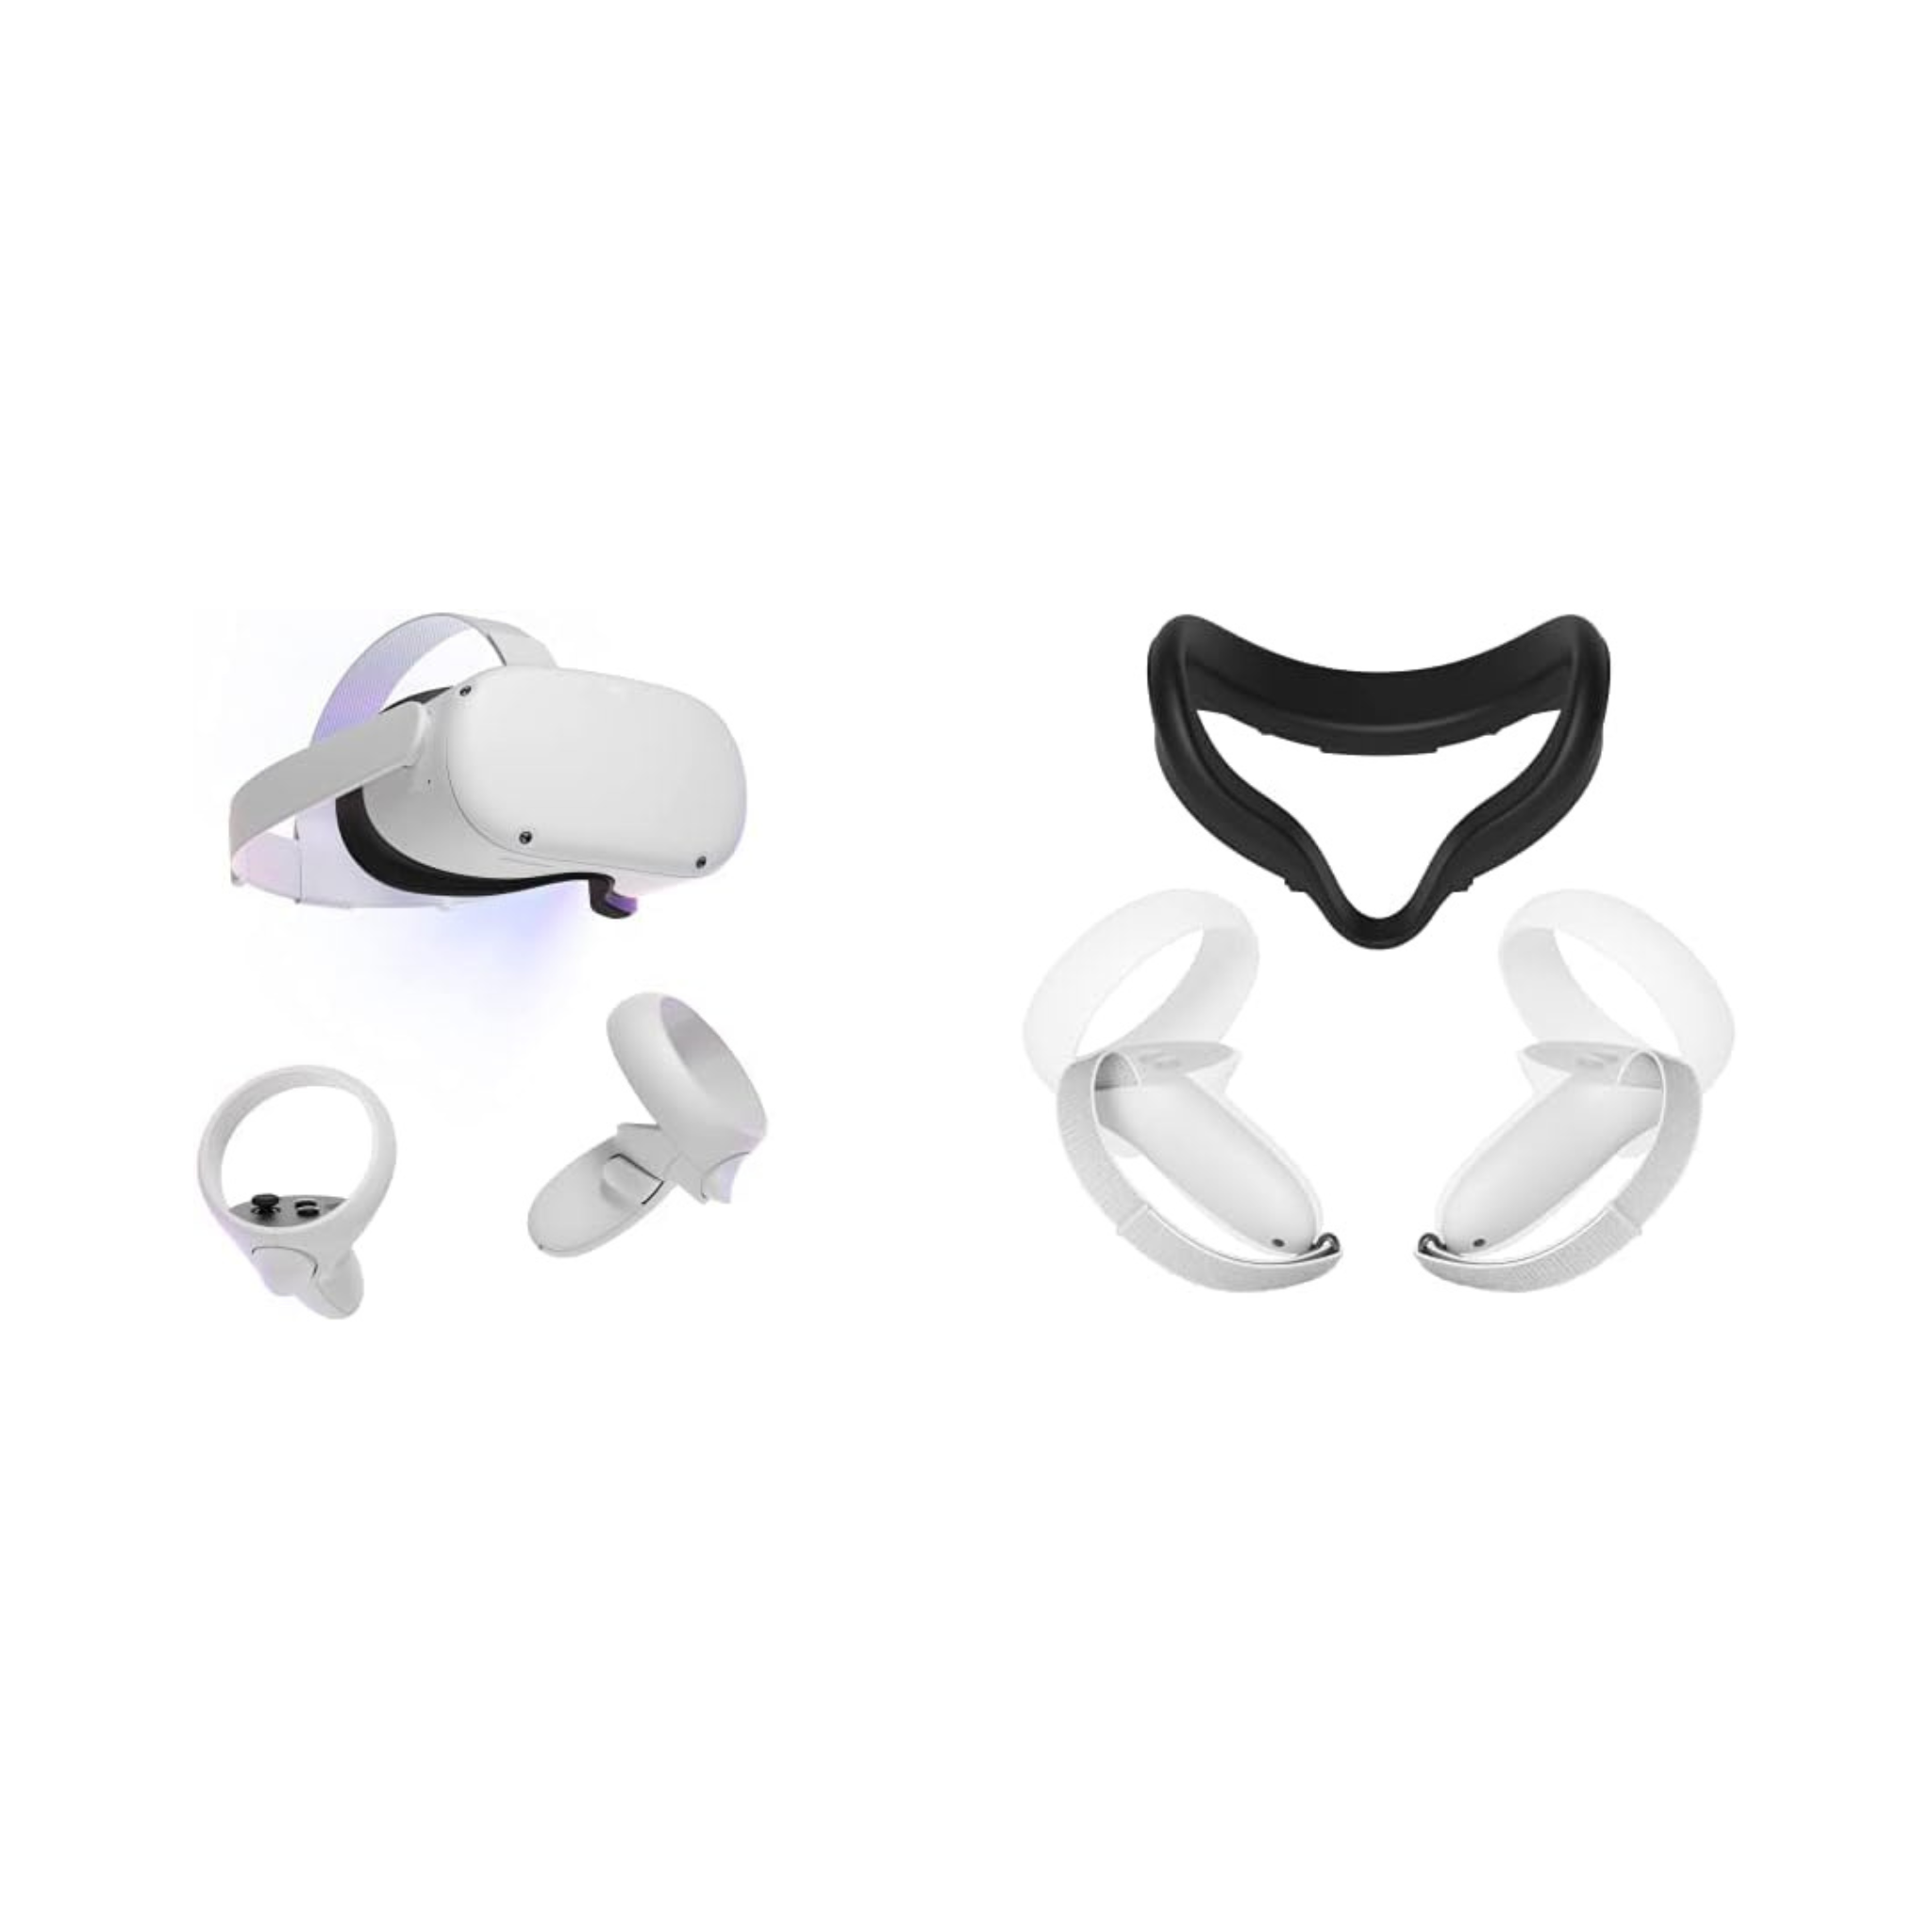 Meta Quest 2 Advanced All-In-One Virtual Reality Headset With Active Pack